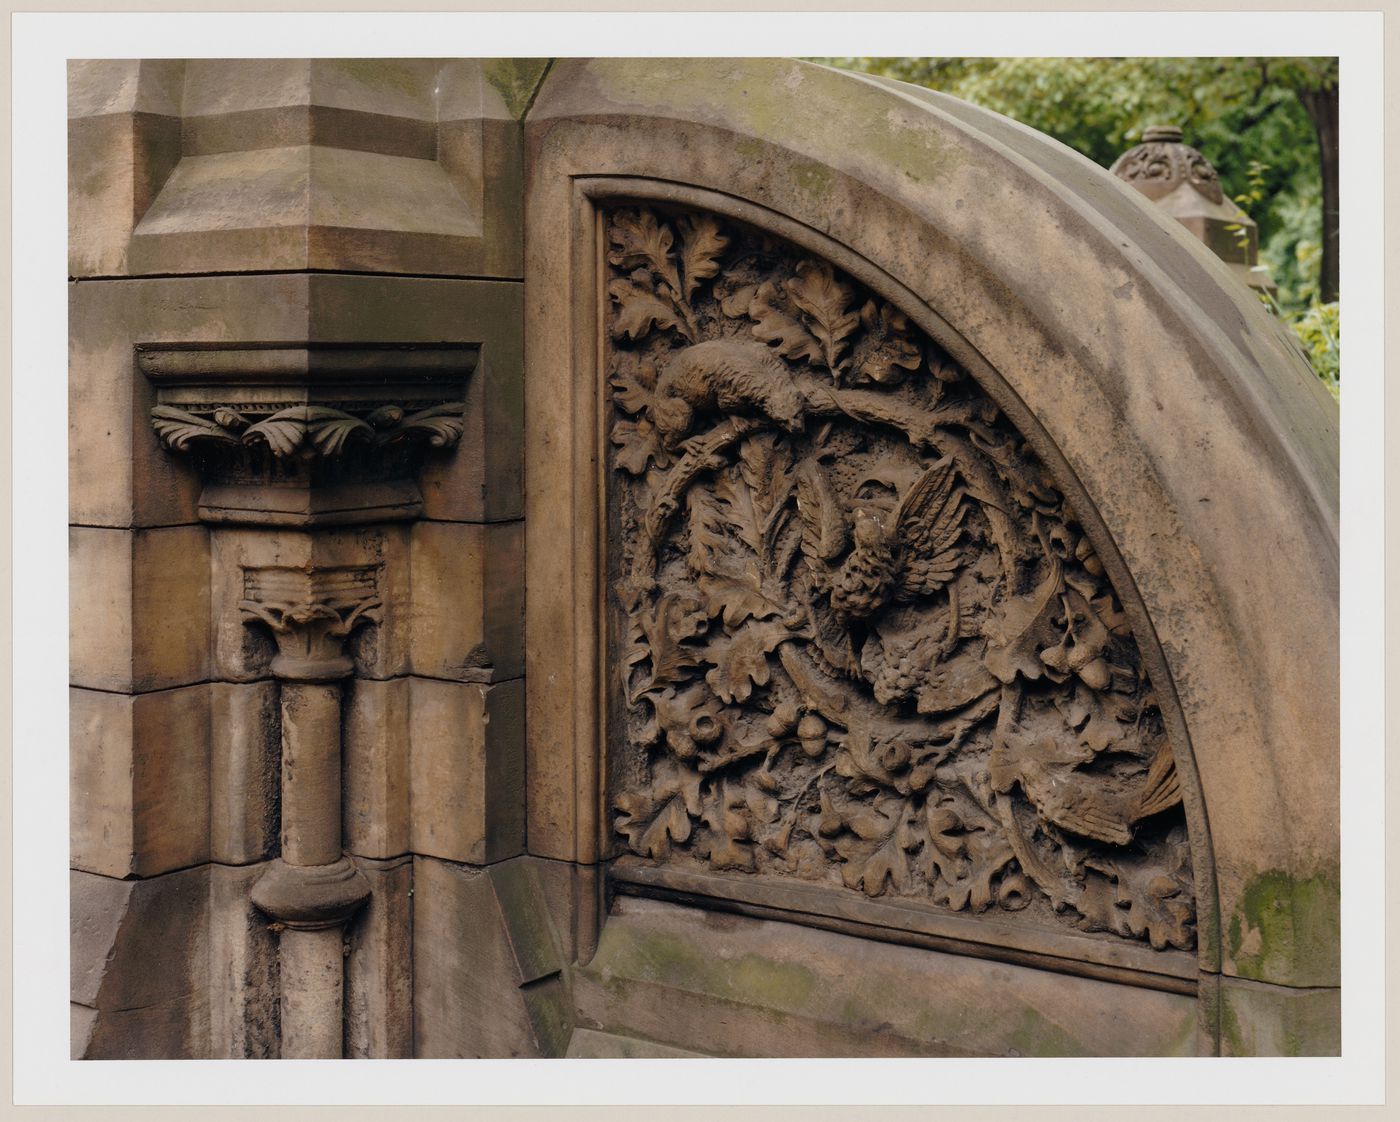 Viewing Olmsted: Detail, Concert Grove, Prospect Park, Brooklyn, New York City, New York